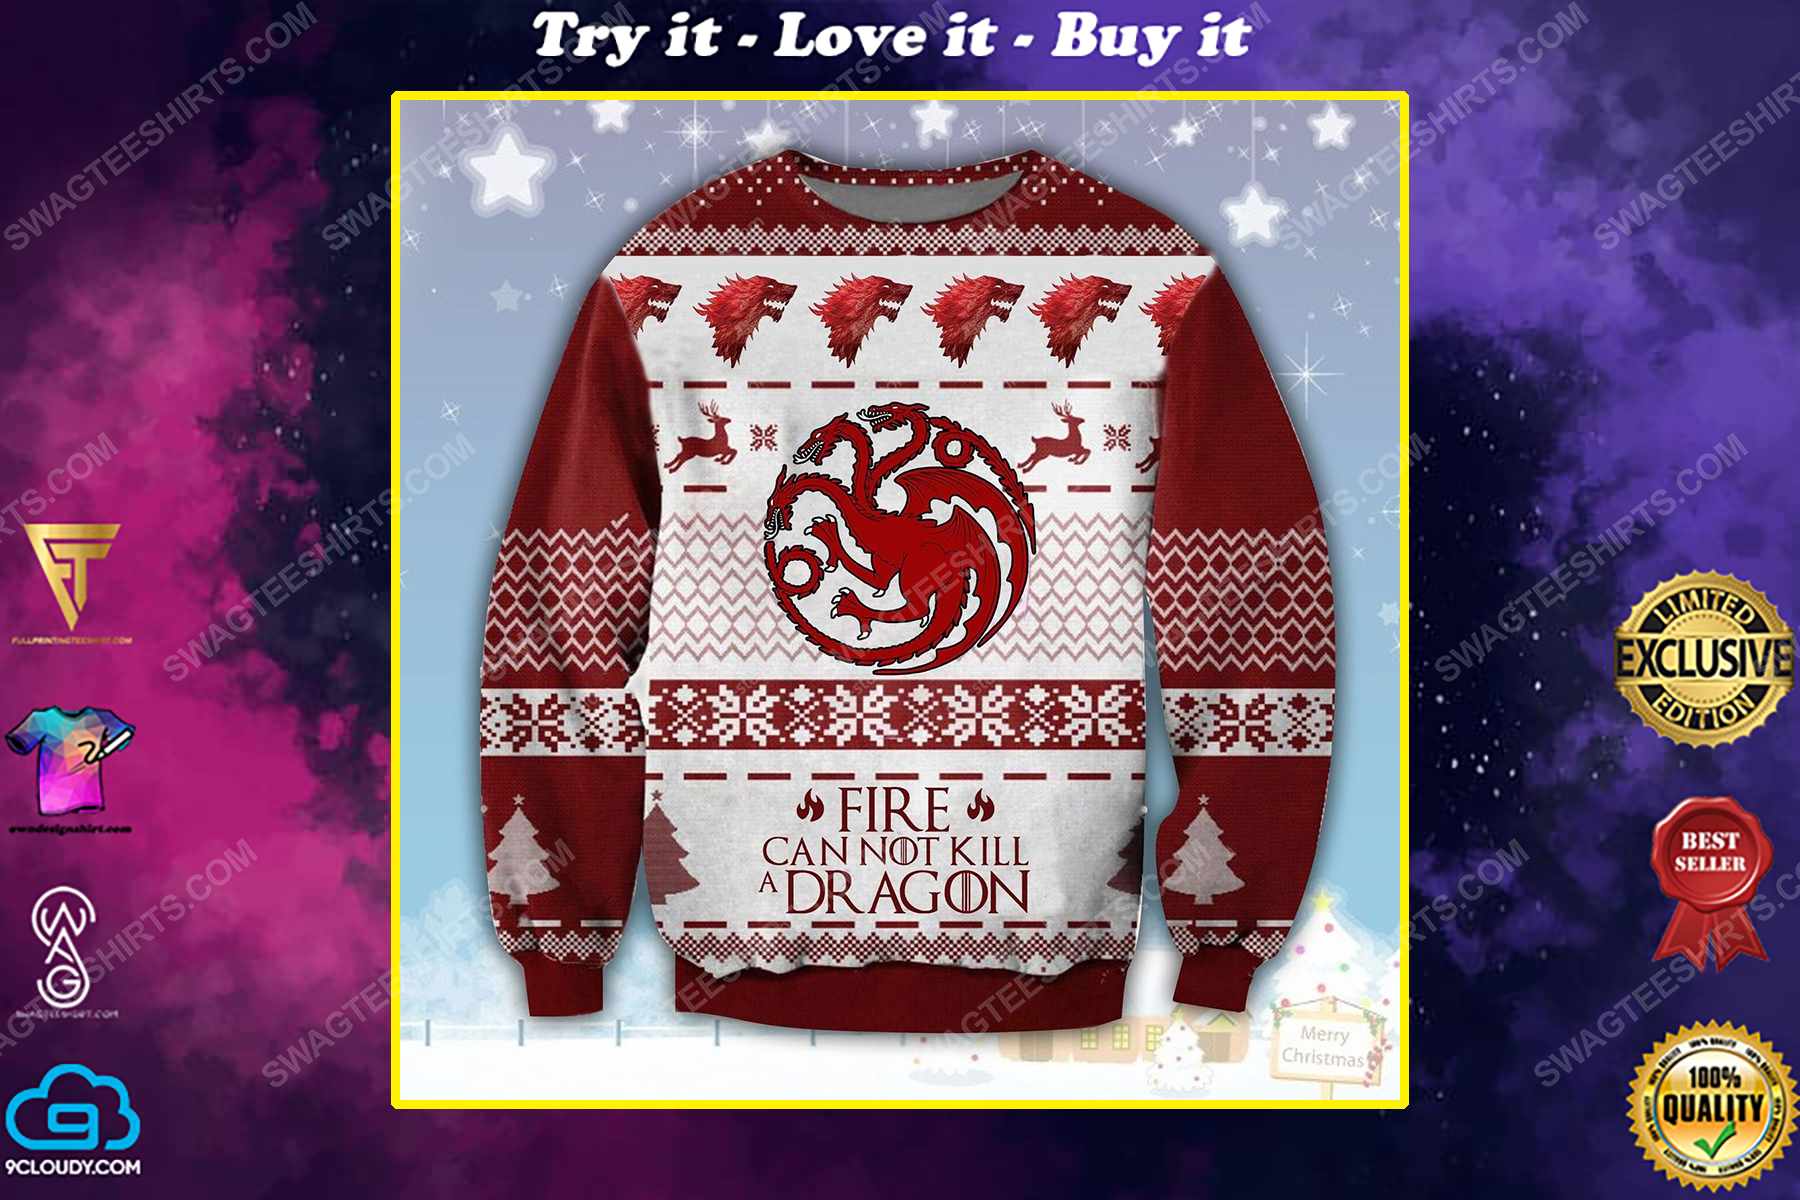 Game of thrones fire cannot kill a dragon ugly christmas sweater 1